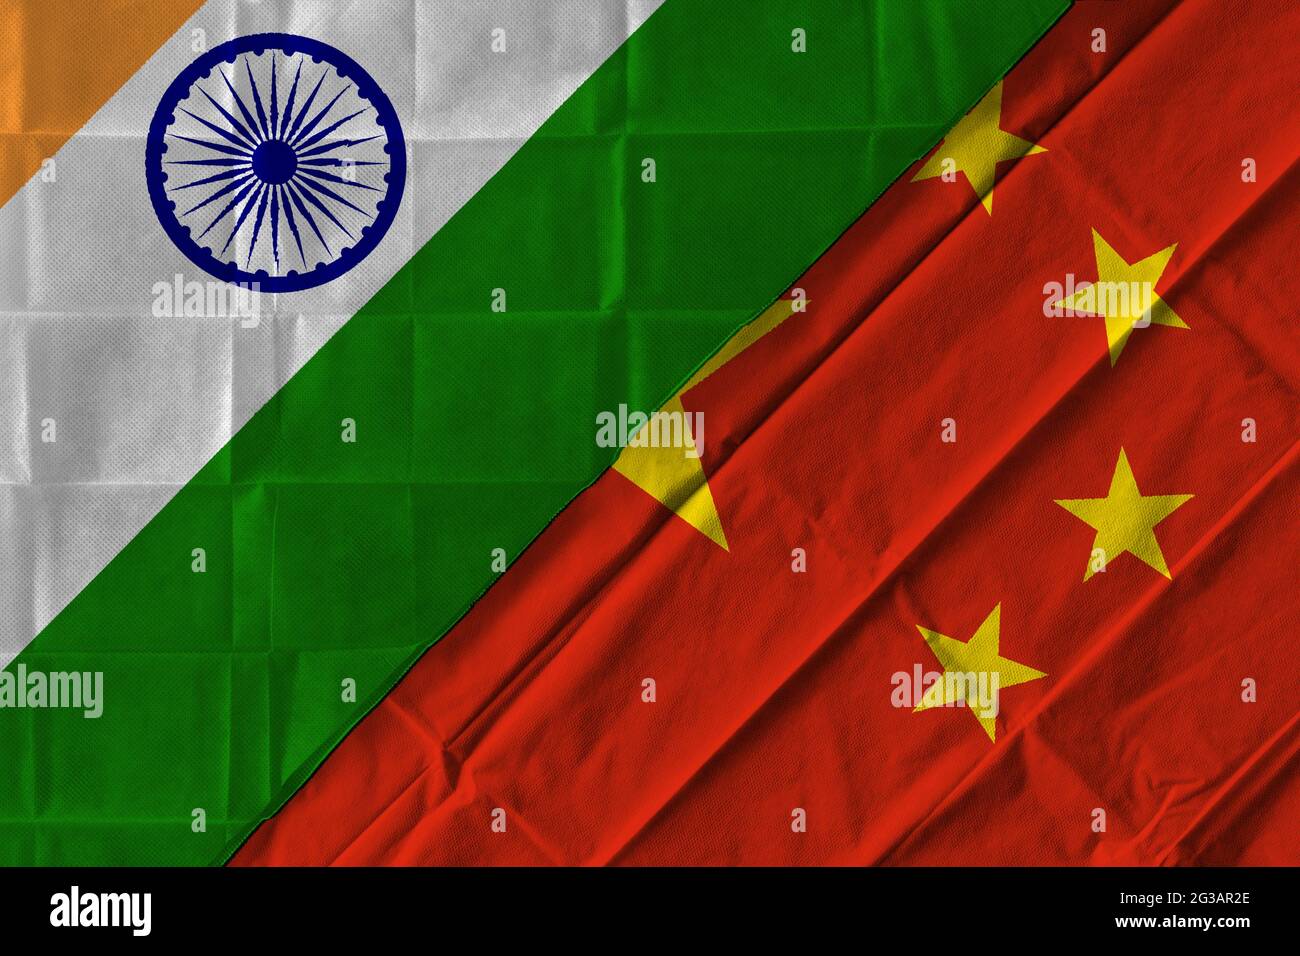 Concept of the relationship between India and China with two flags over each other Stock Photo